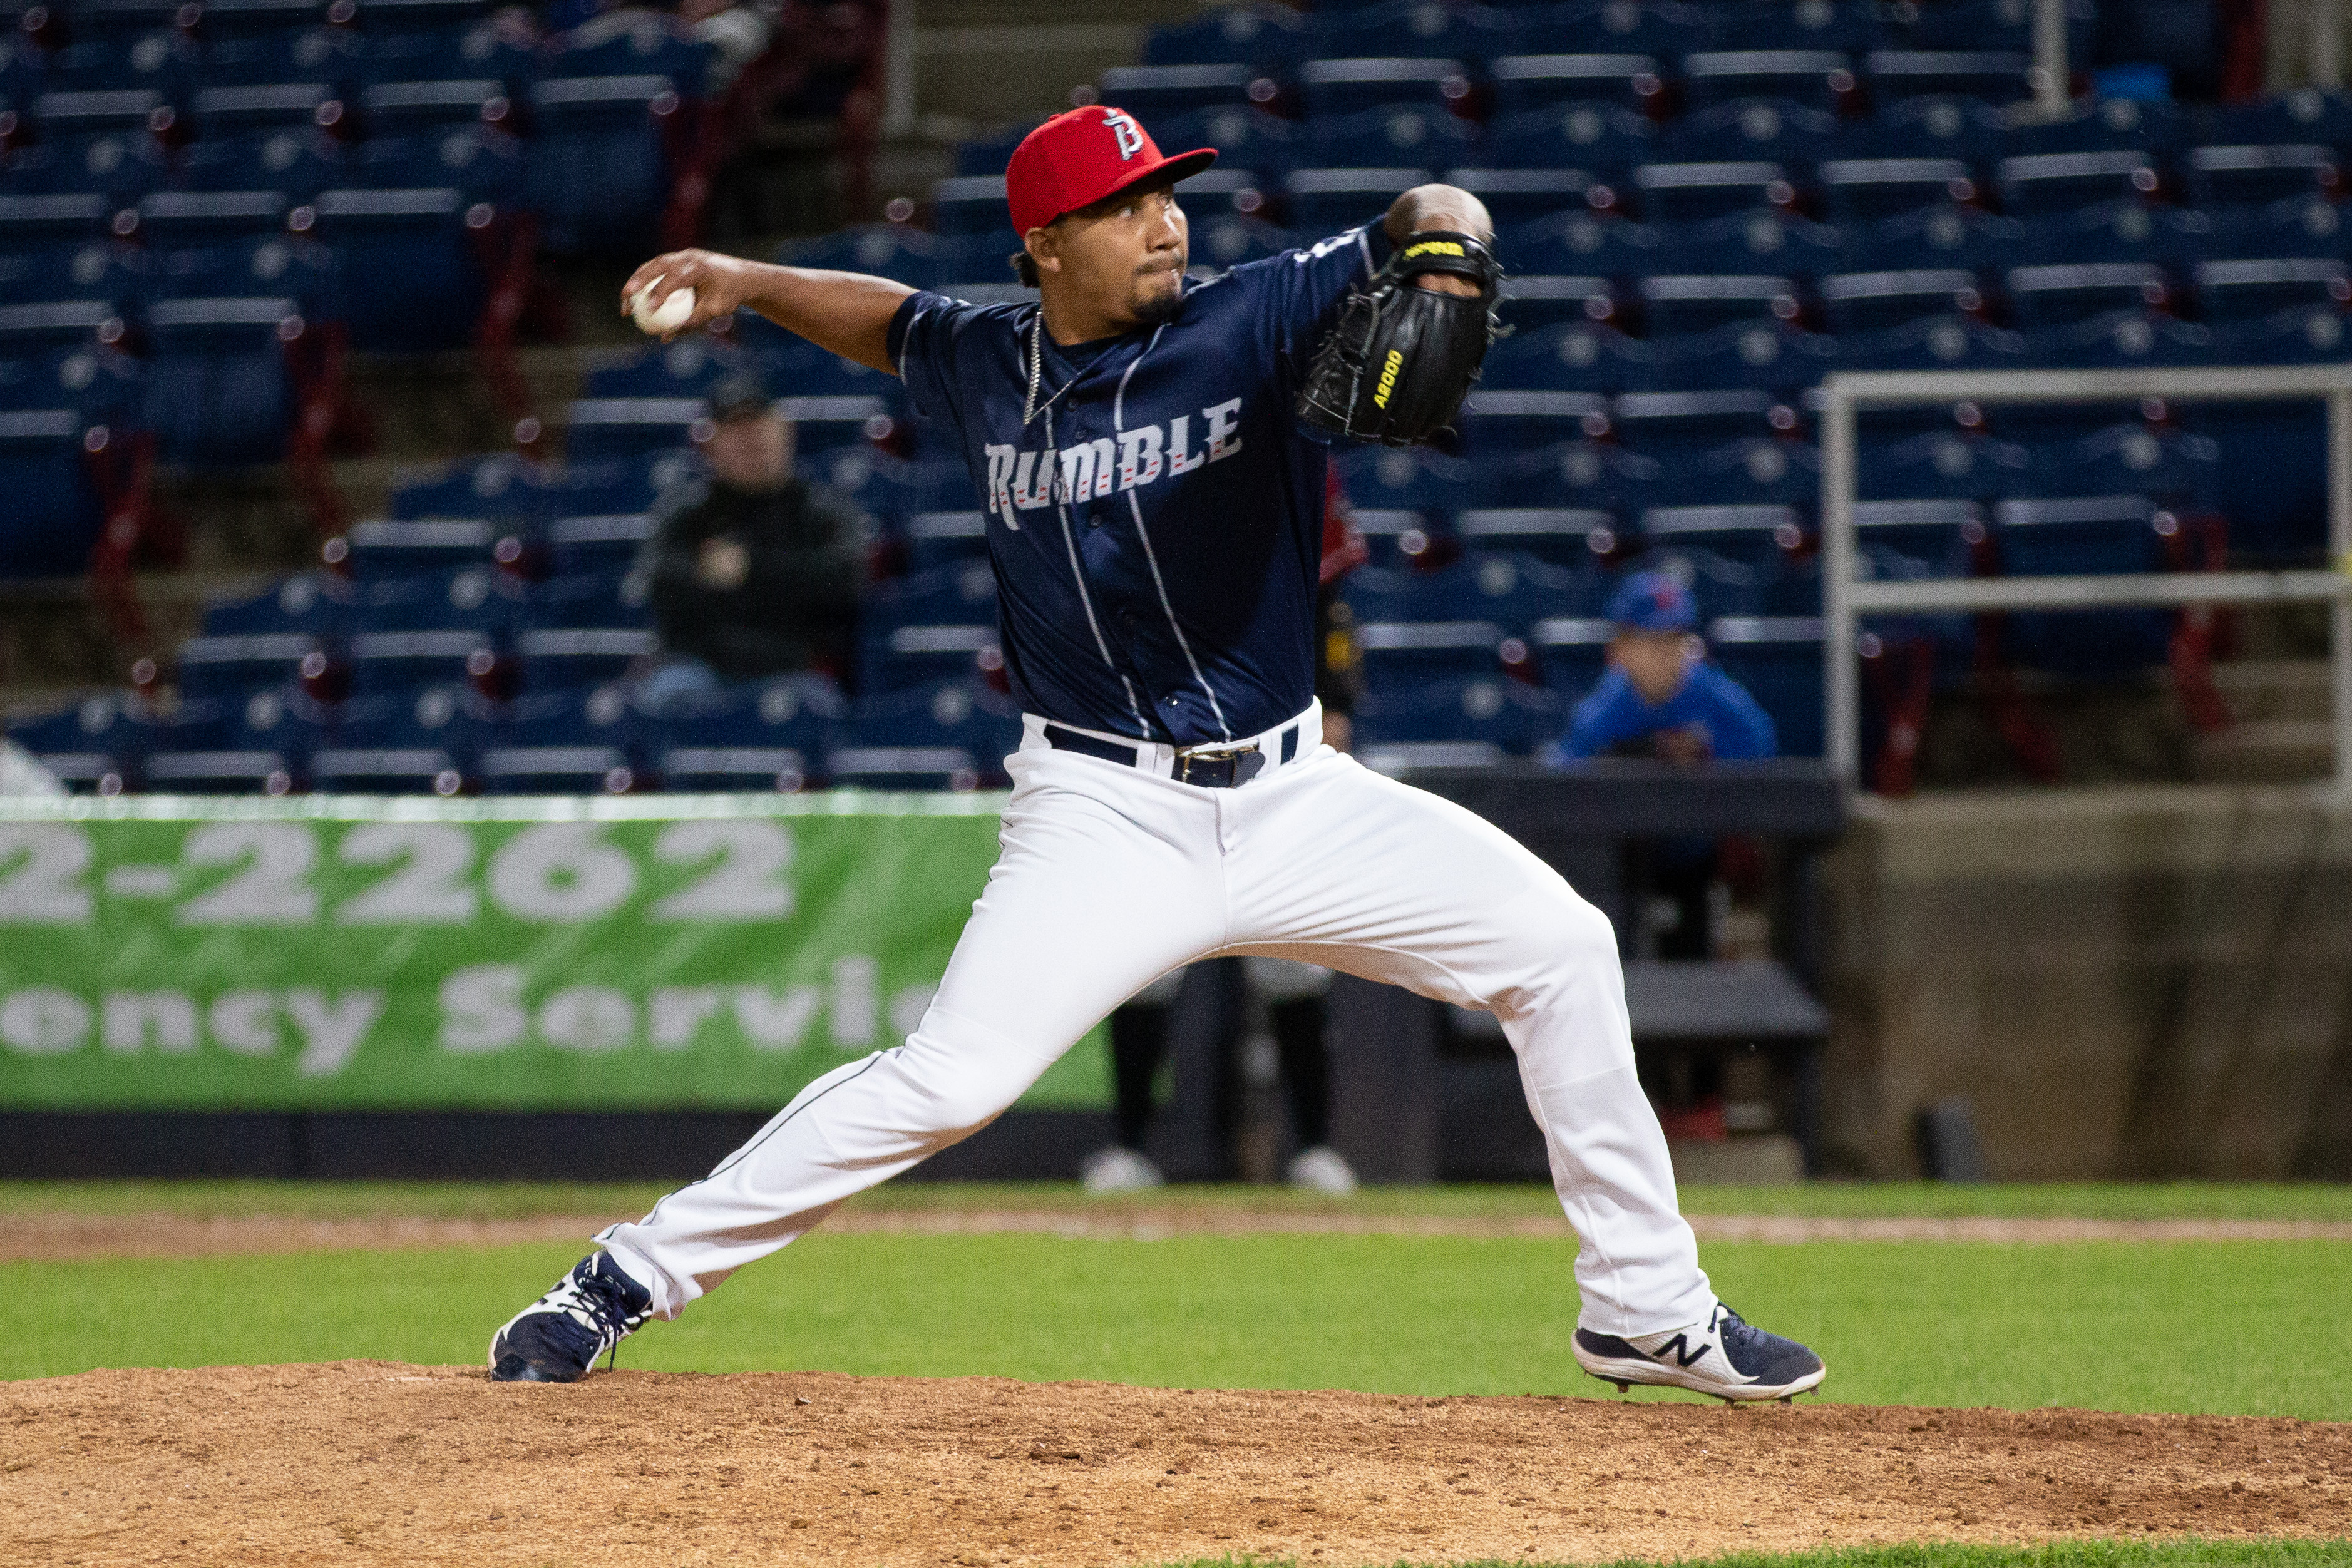 Yeizo Campos throws a pitch during a Binghamton Rumble Ponies game on May 13, 2021.